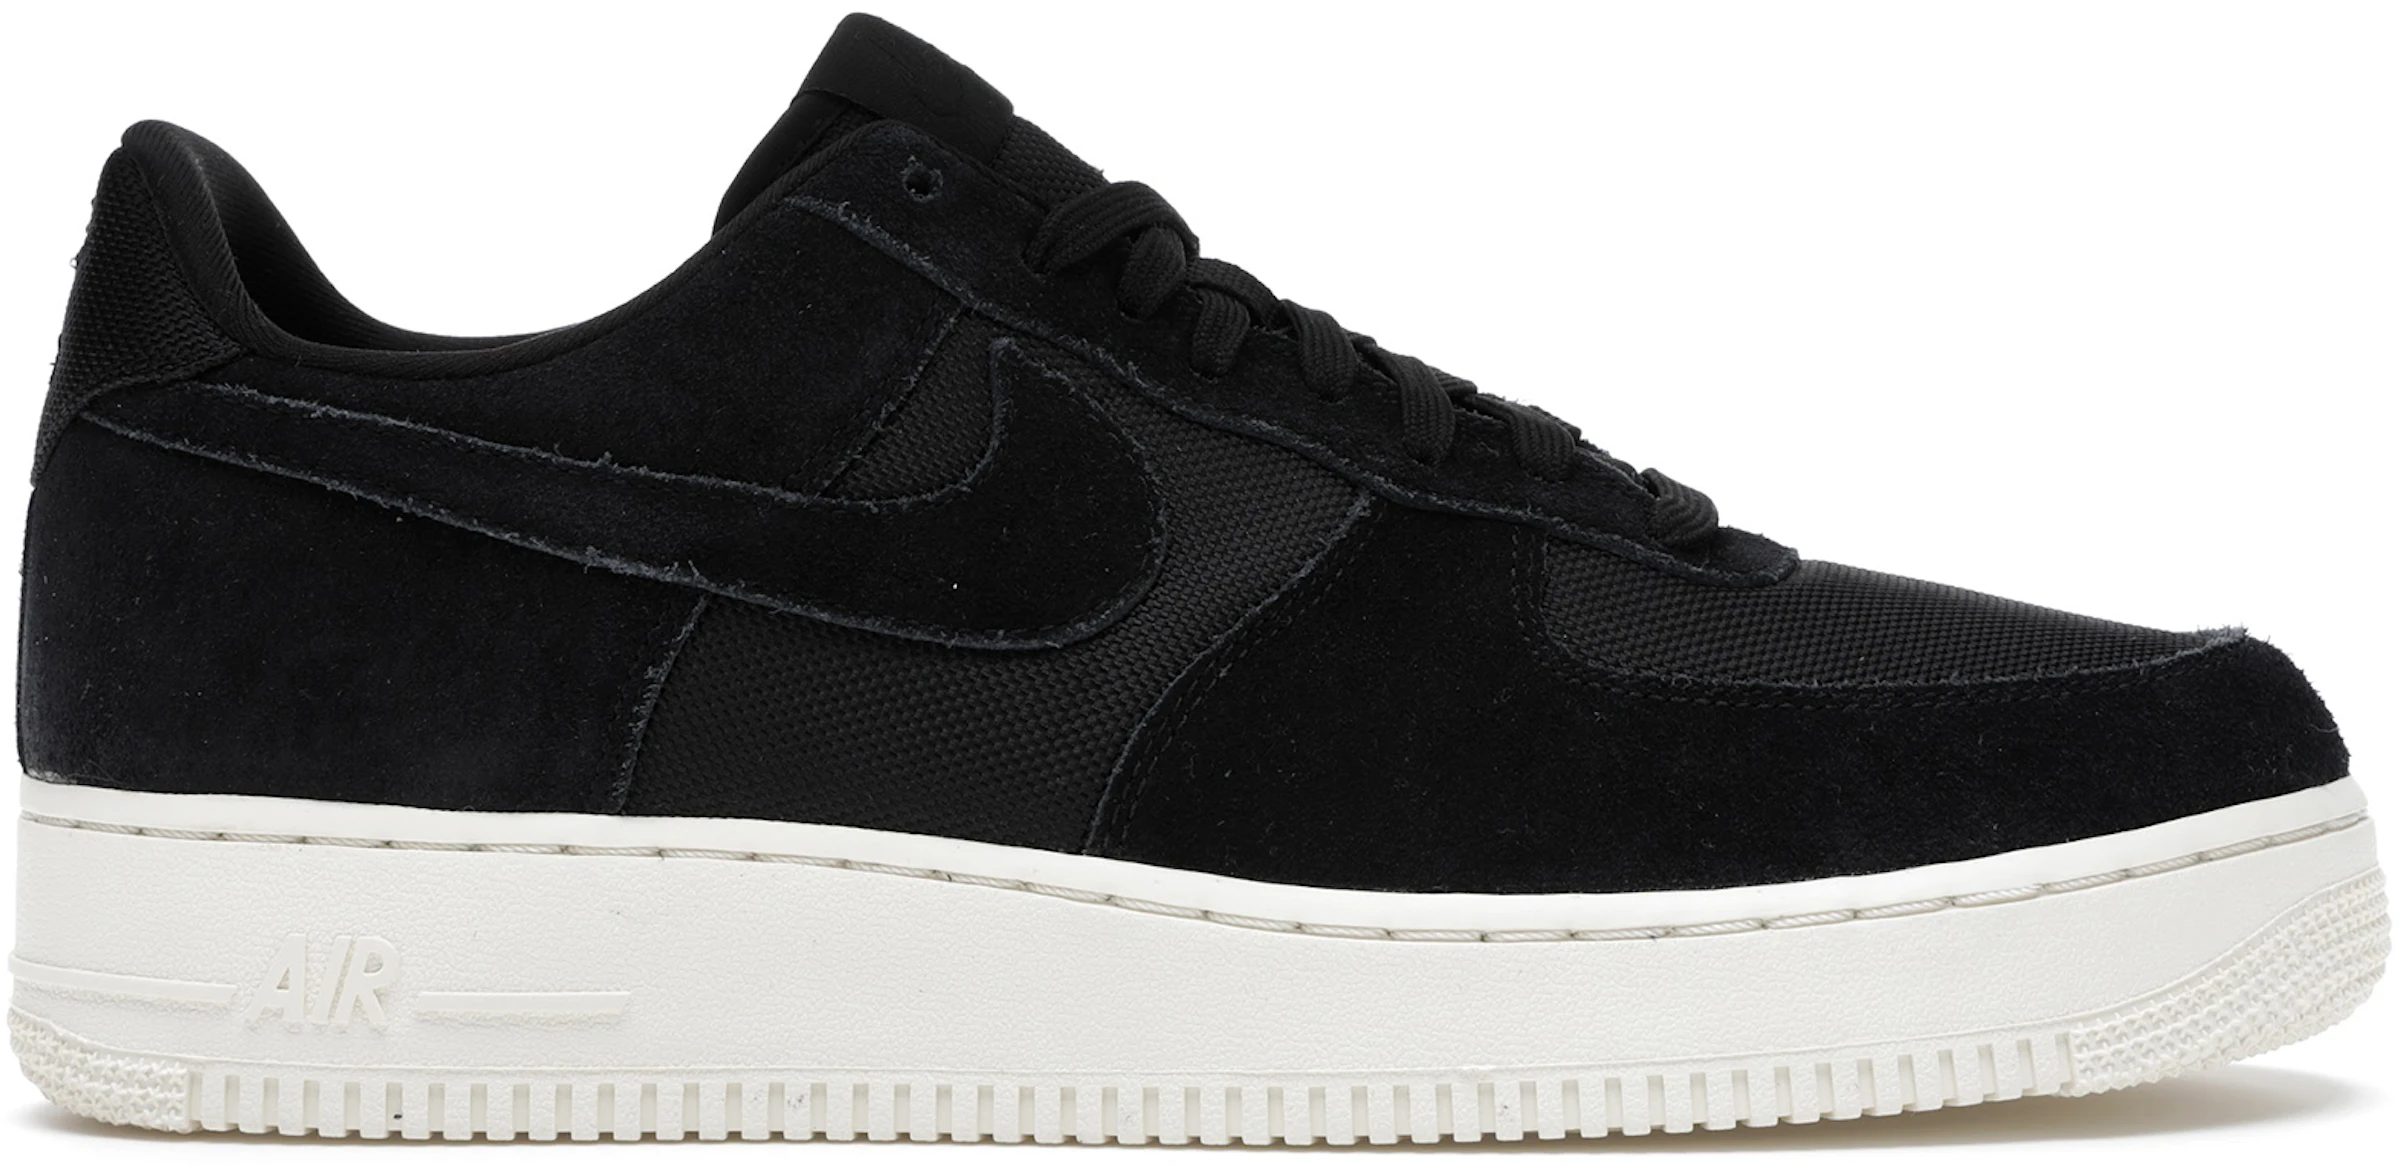 Nike Air Force 1 Low '07 Black Suede - AO2409-001 US